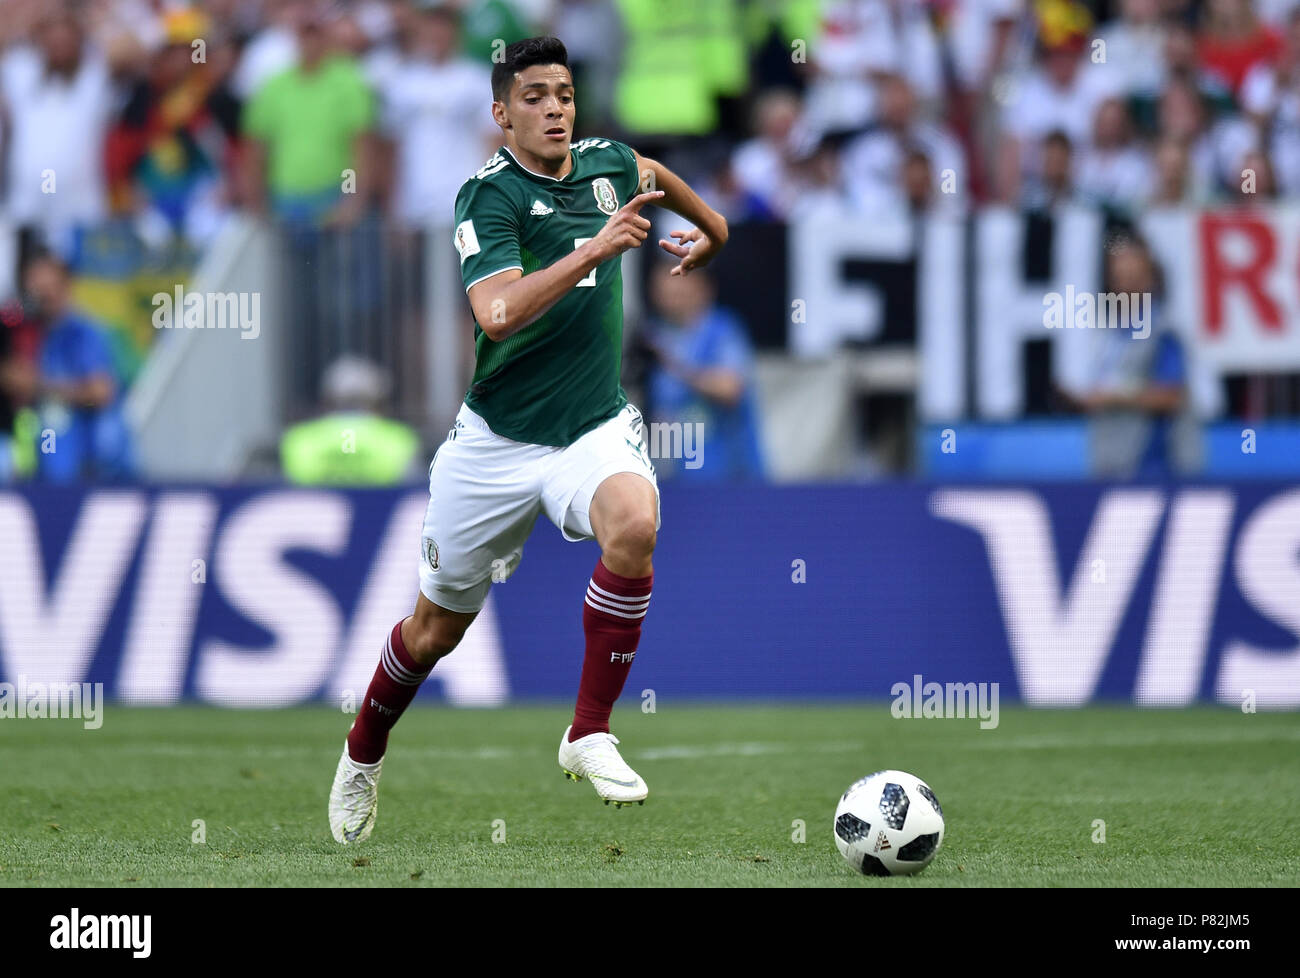 MOSCOW, RUSSIA - JUNE 17: Raul Jimenez of Mexico in action during the 2018 FIFA World Cup Russia group F match between Germany and Mexico at Luzhniki Stadium on June 17, 2018 in Moscow, Russia. (Photo by Lukasz Laskowski/PressFocus/MB Media) Stock Photo